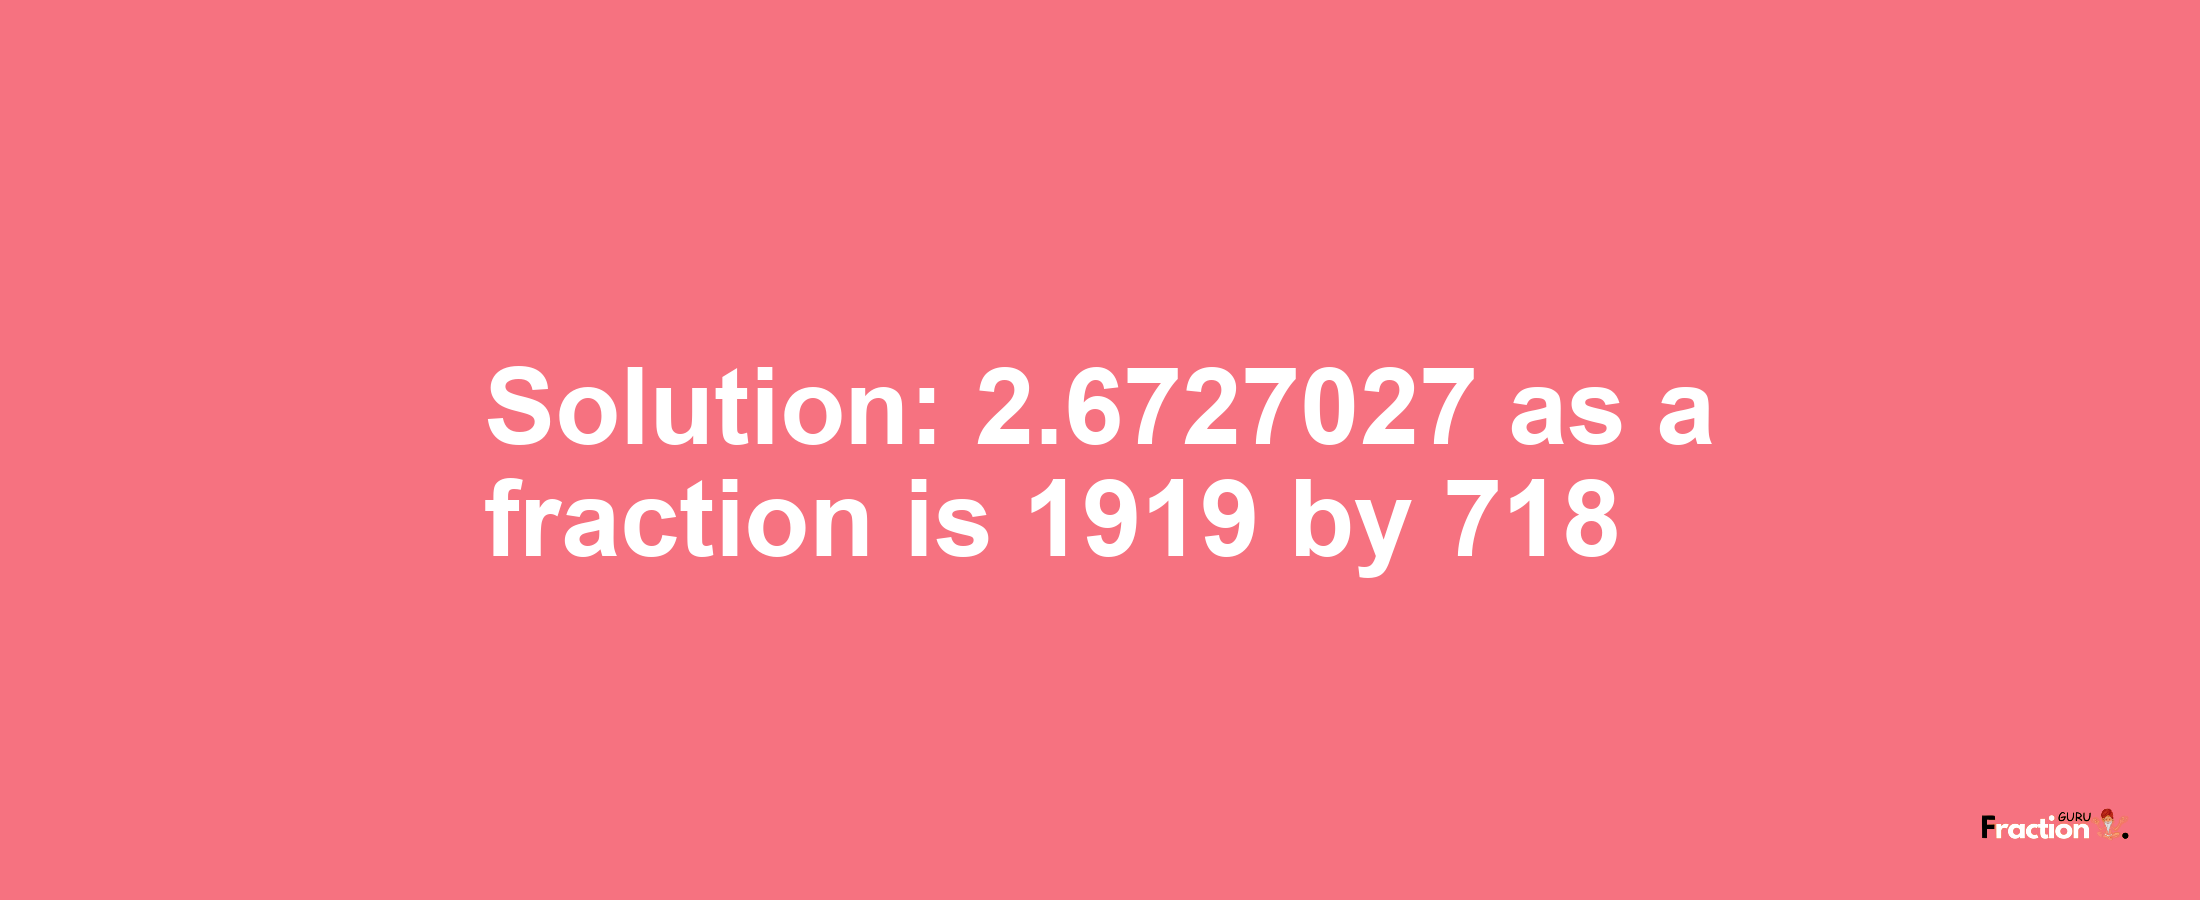 Solution:2.6727027 as a fraction is 1919/718